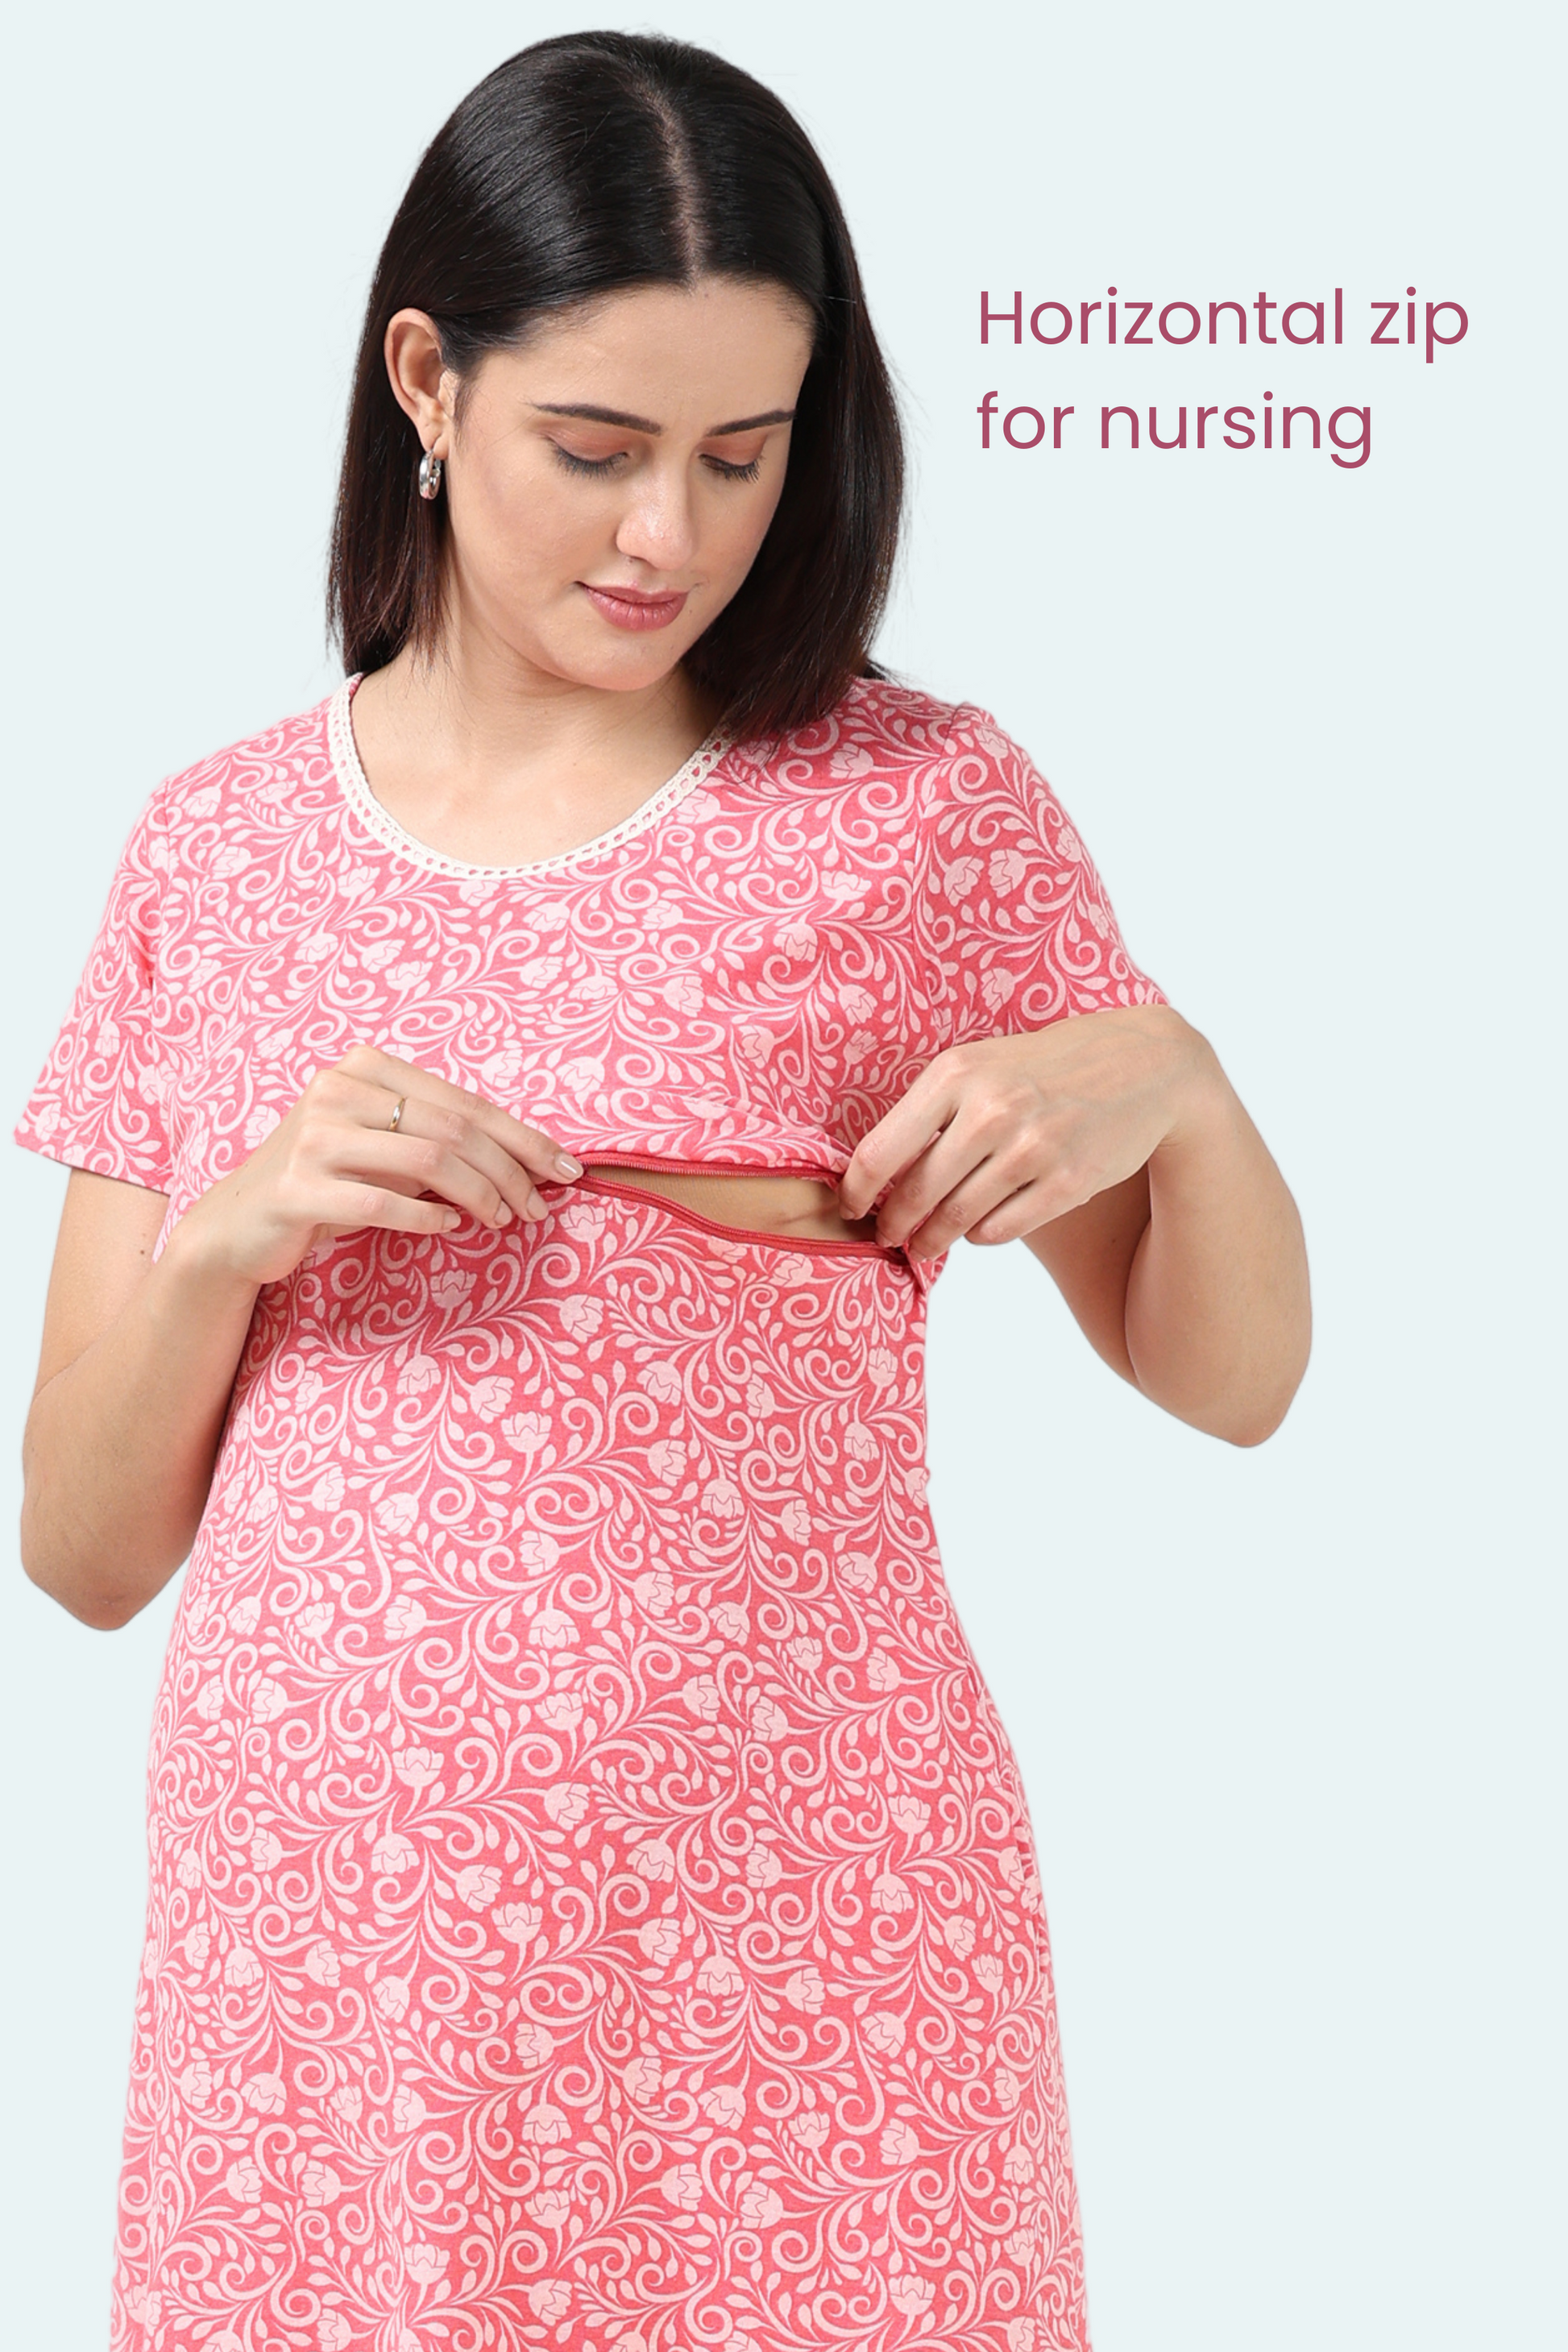 Yellow Maternity Nursing Nightgown at Rs 1299.00, Maternity Nightgowns